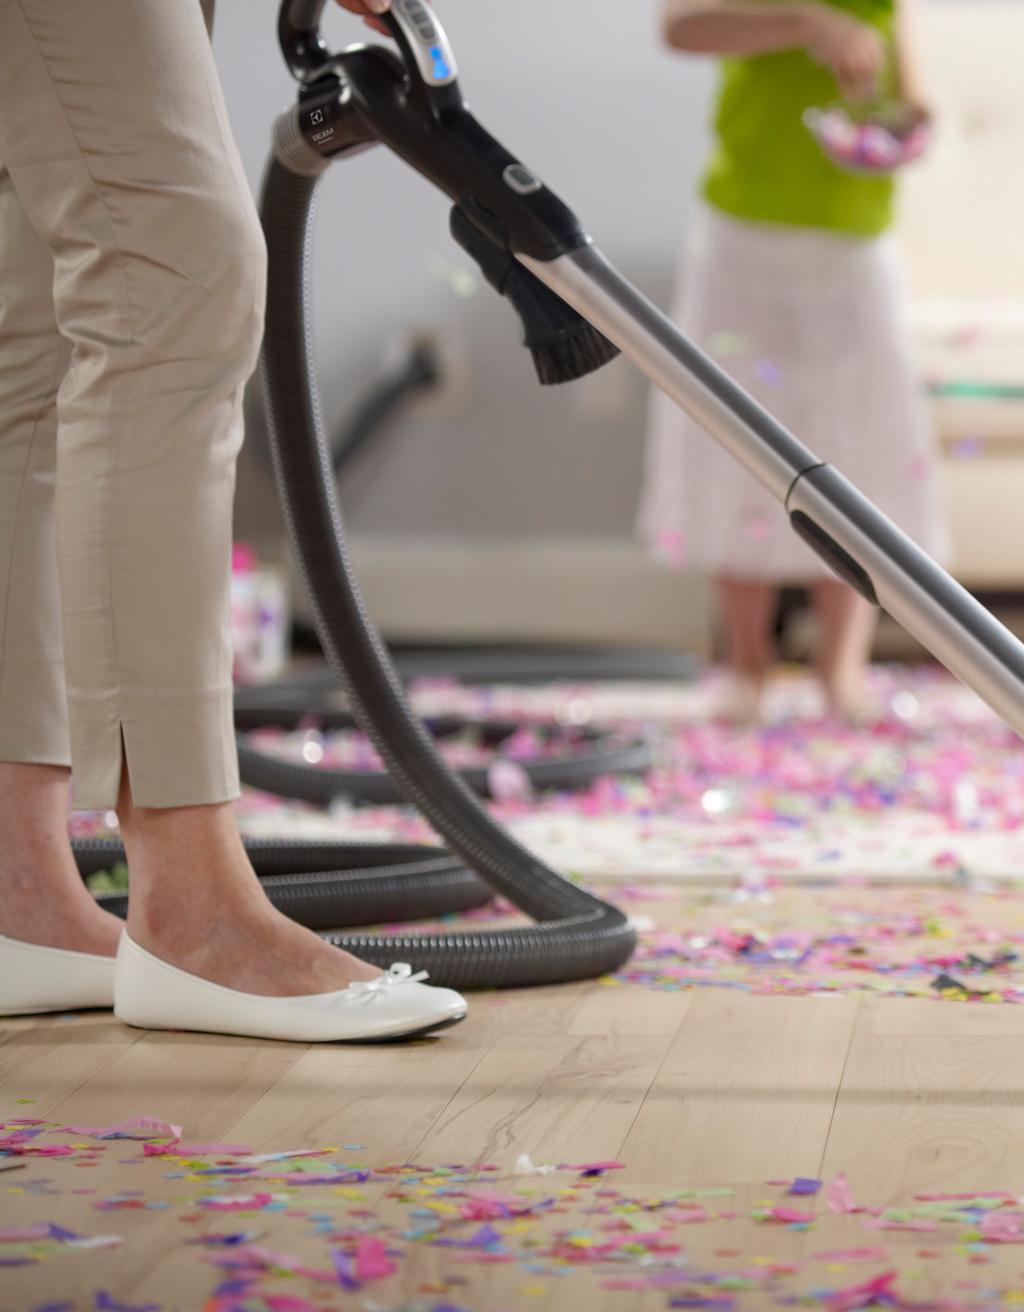 With advanced sound suppression technology, you can vacuum without missing that important call.